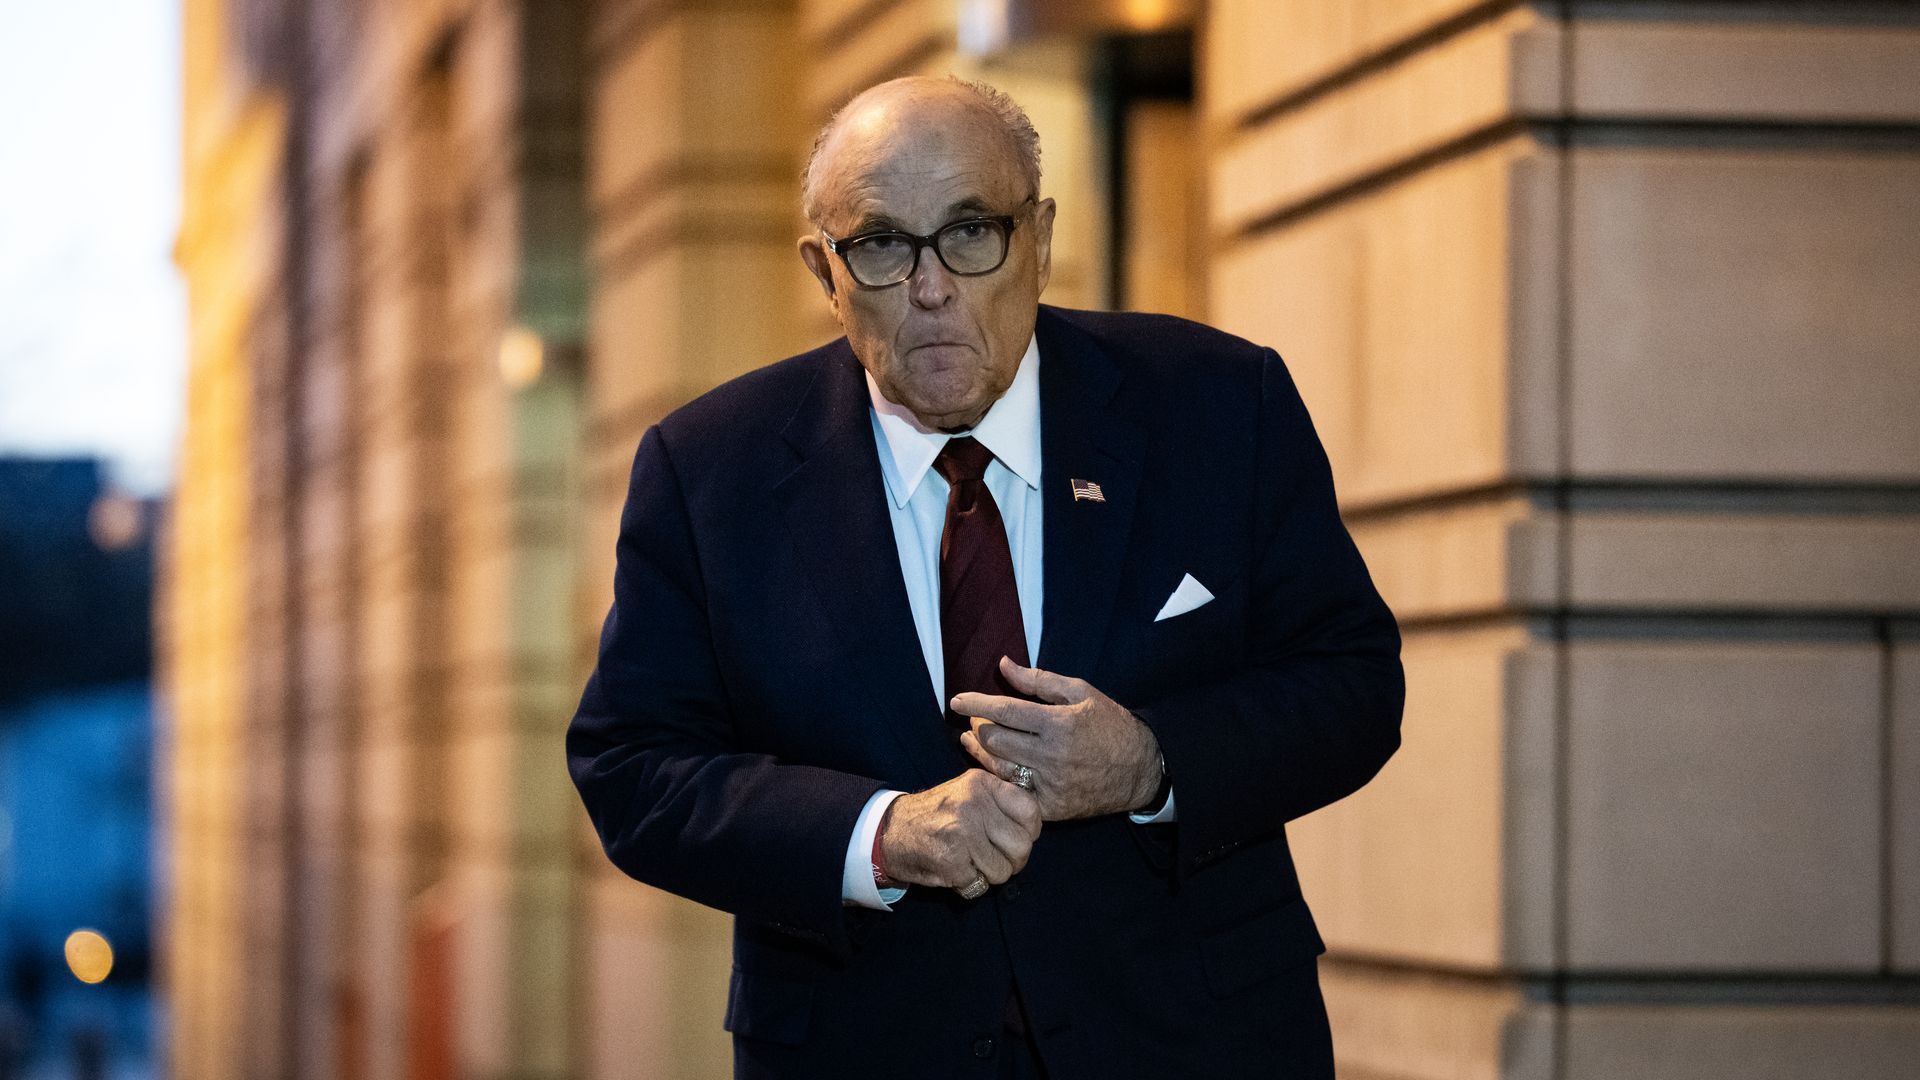 Rudy Giuliani outside of a federal courthouse in Washington, D.C.